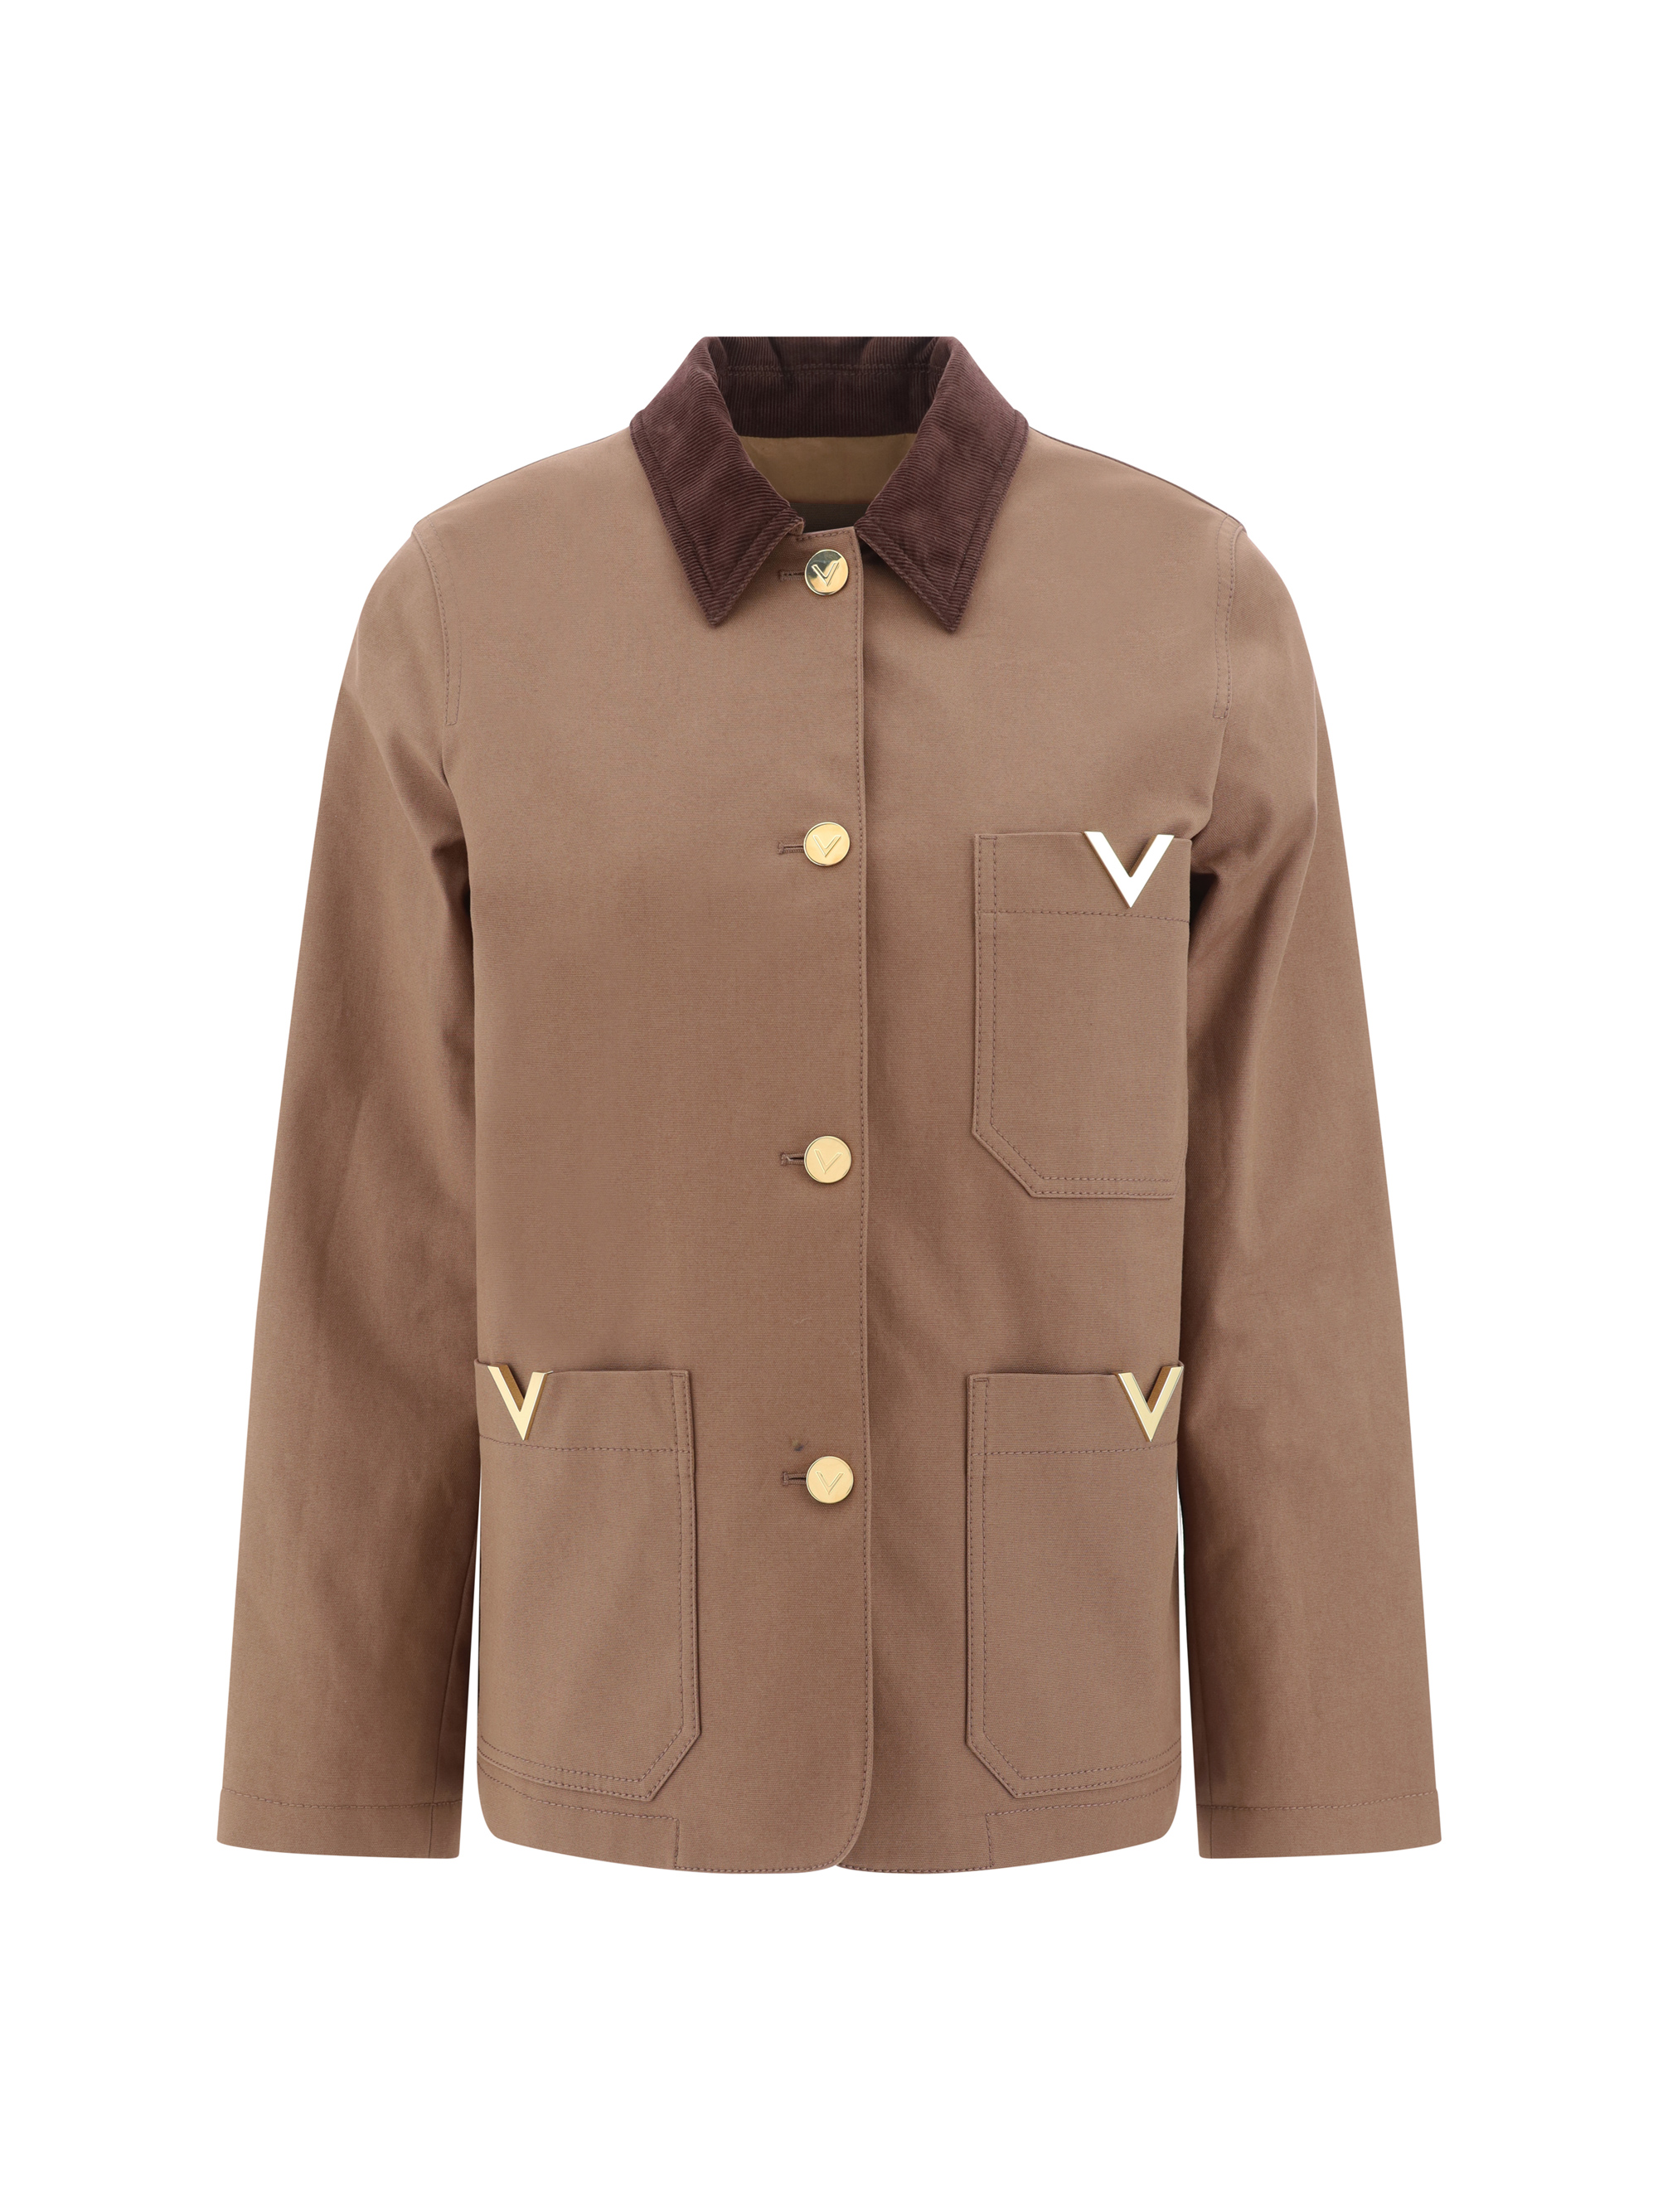 Valentino Pap Jacket In Clay